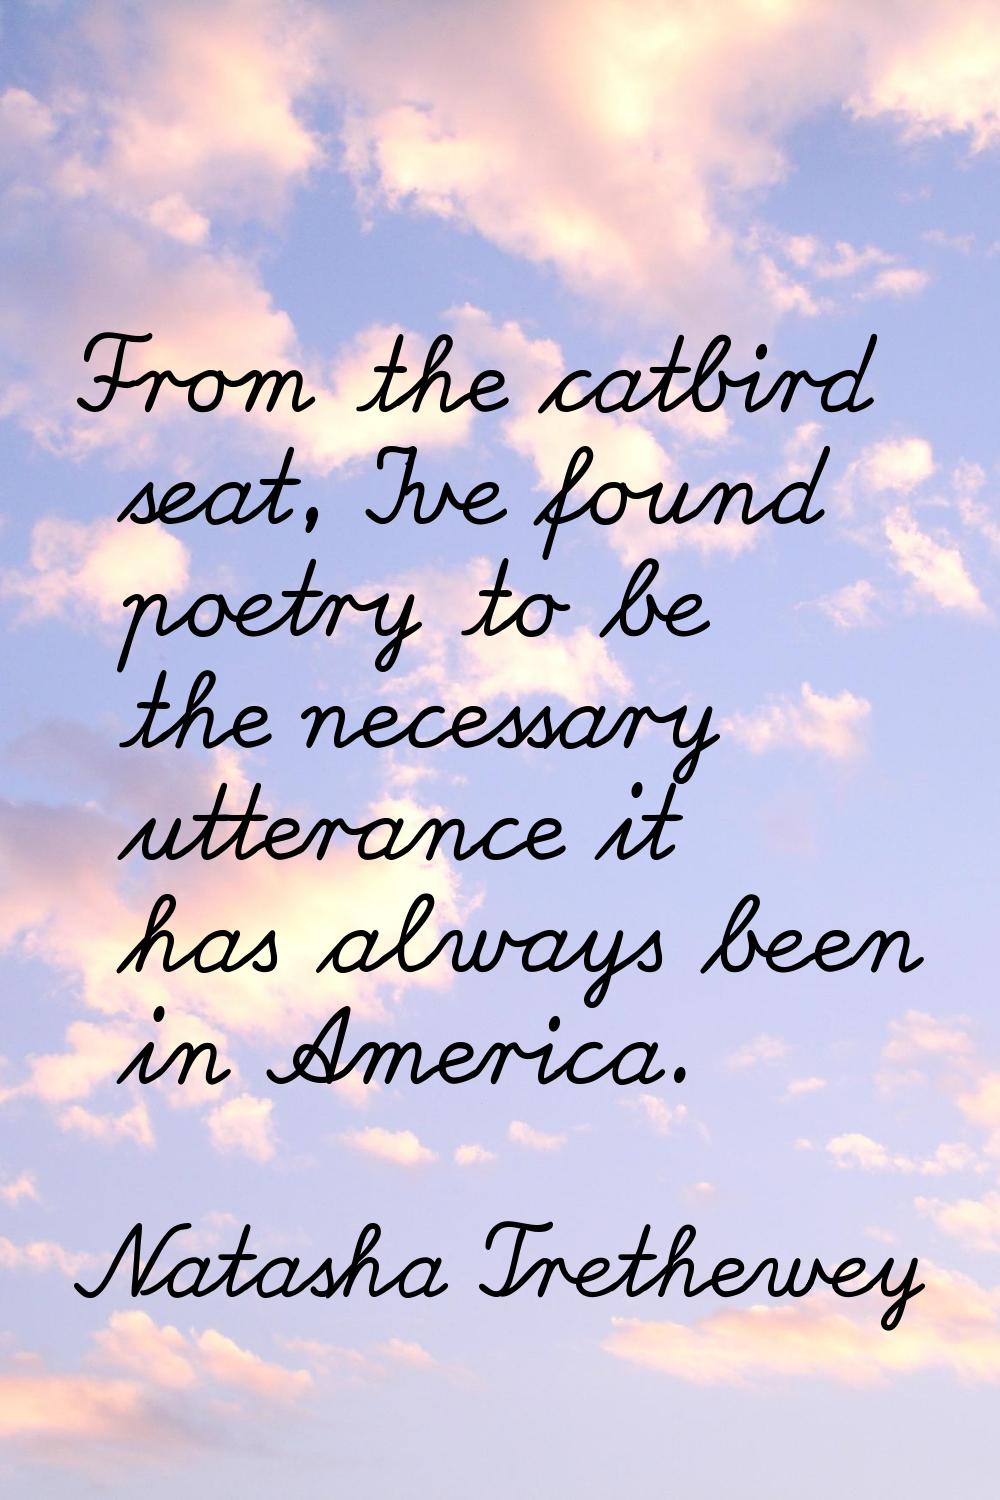 From the catbird seat, I've found poetry to be the necessary utterance it has always been in Americ